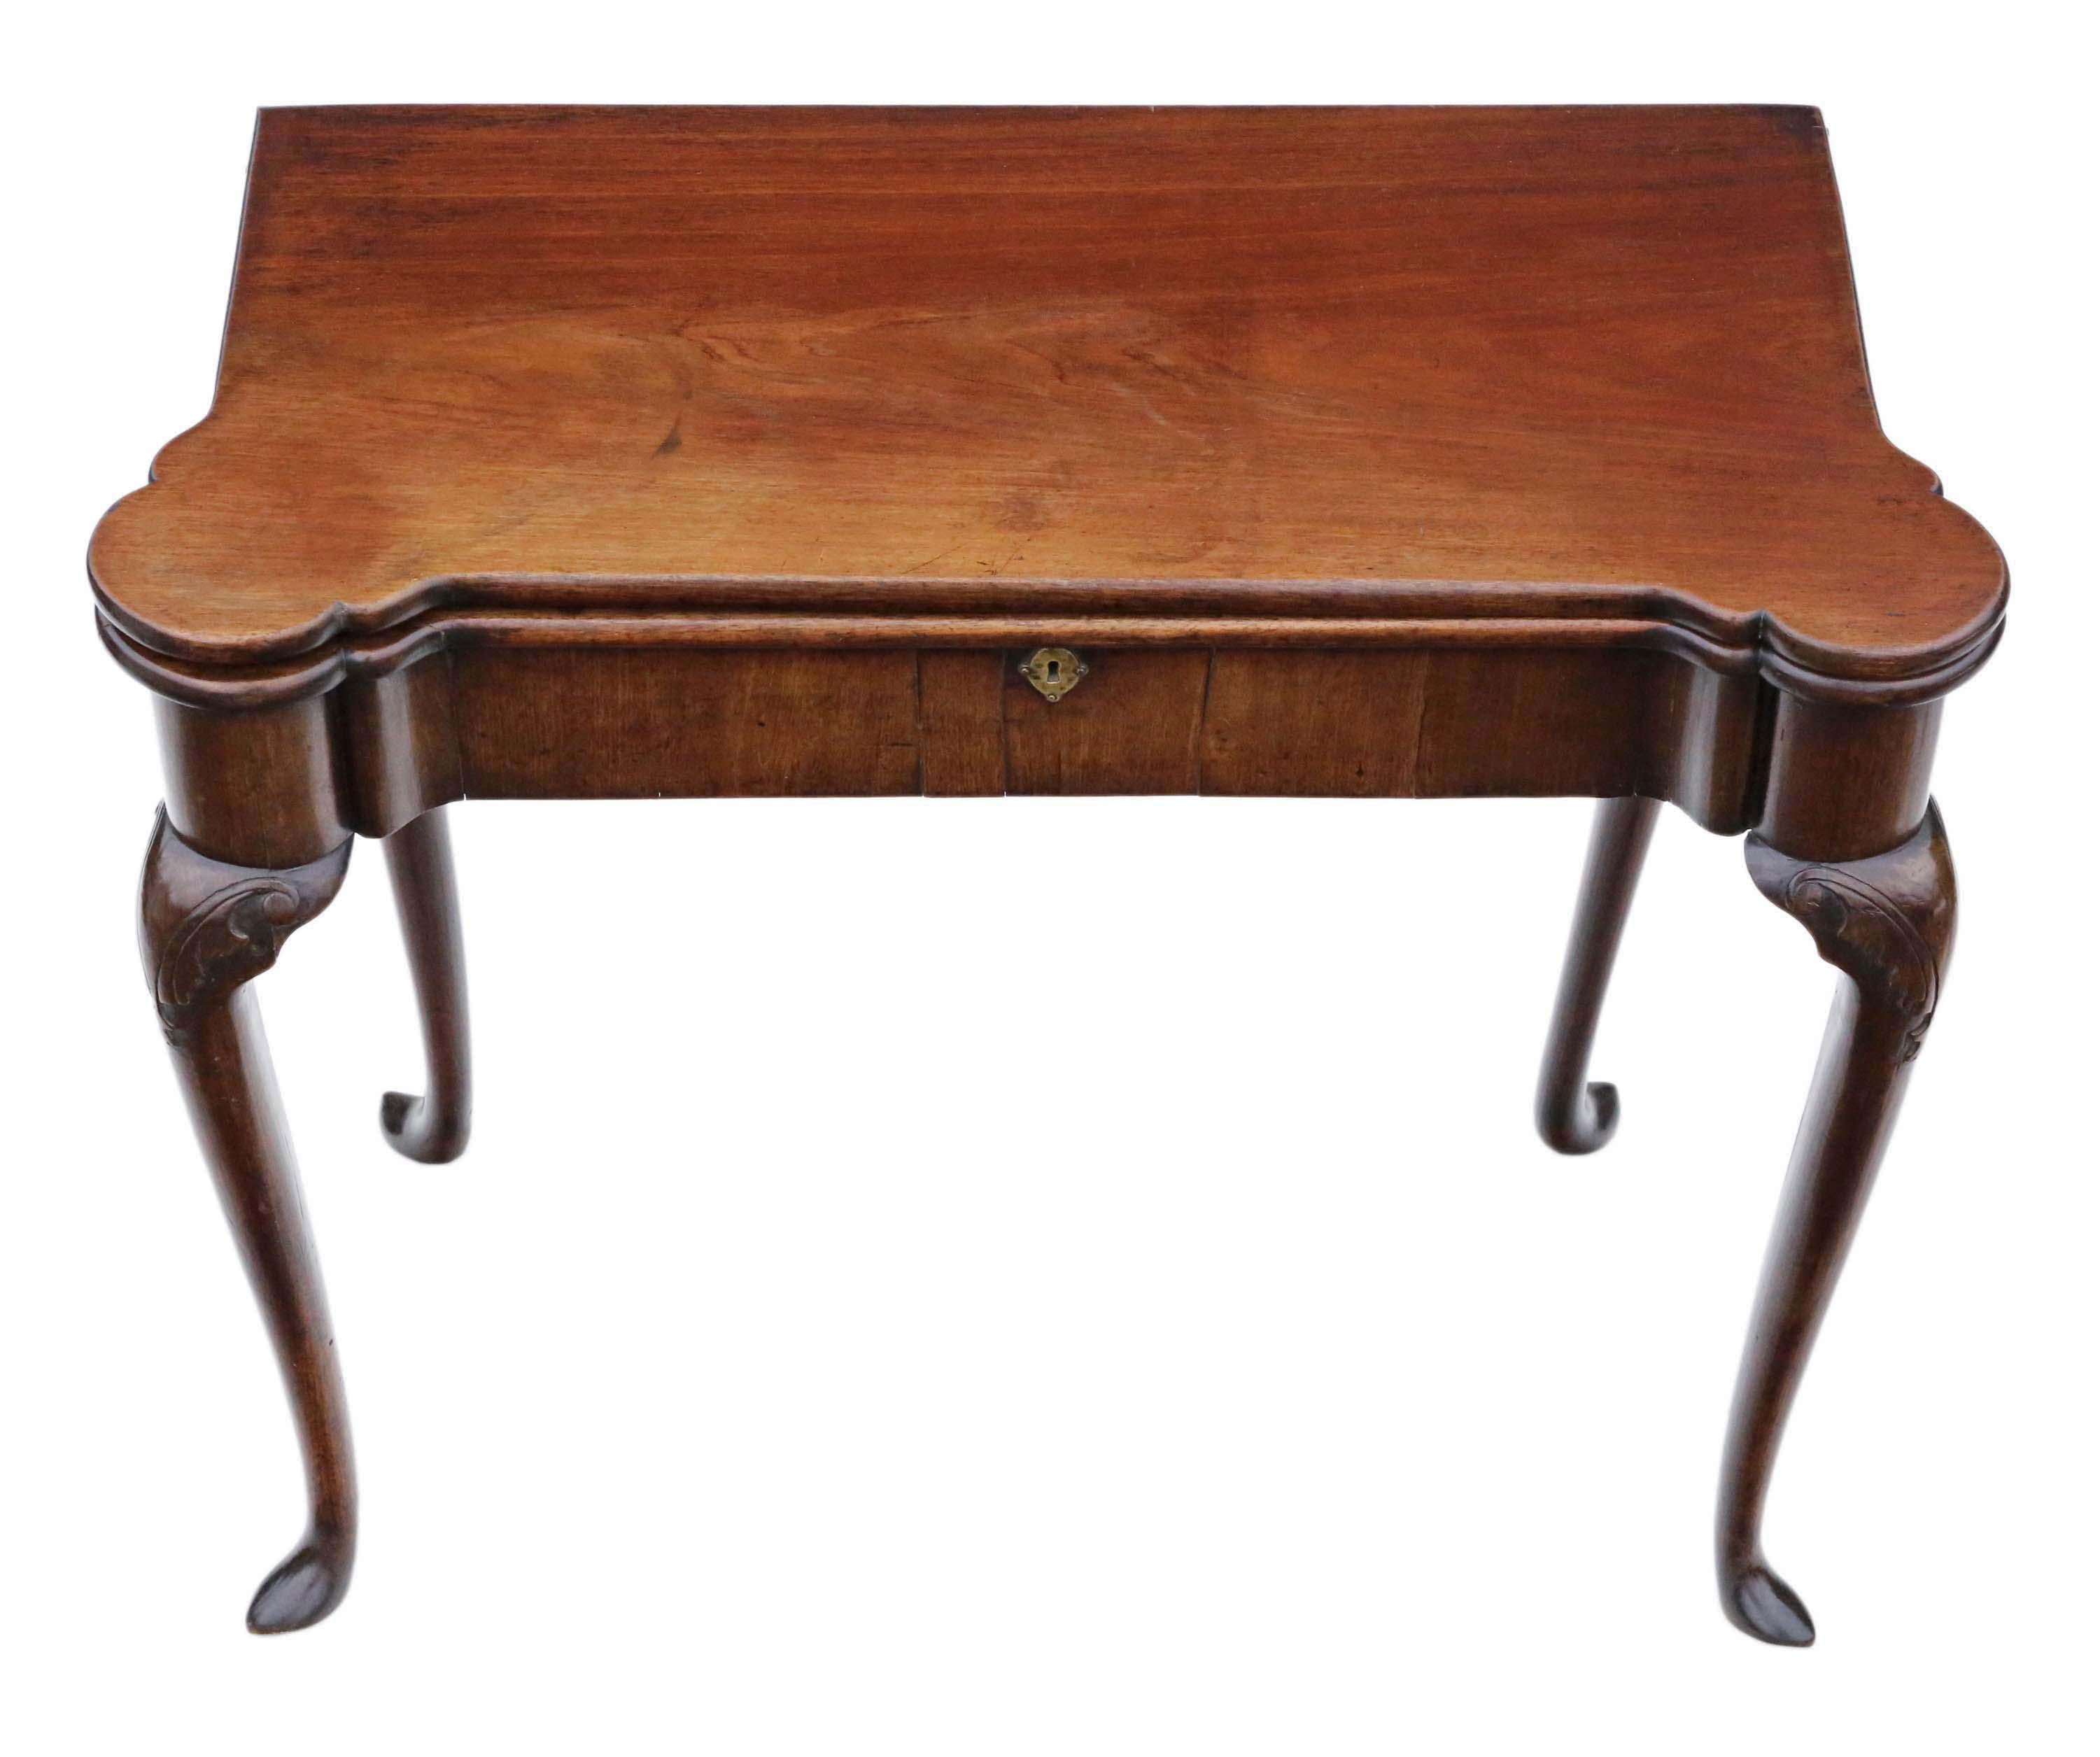 Antique quality Georgian II C1750 inlaid mahogany folding card or tea table. Possibly Irish.

A very rare quality table in very good condition that is full of age, charm and character.

Solid, with no loose joints and no woodworm. Rare lift up